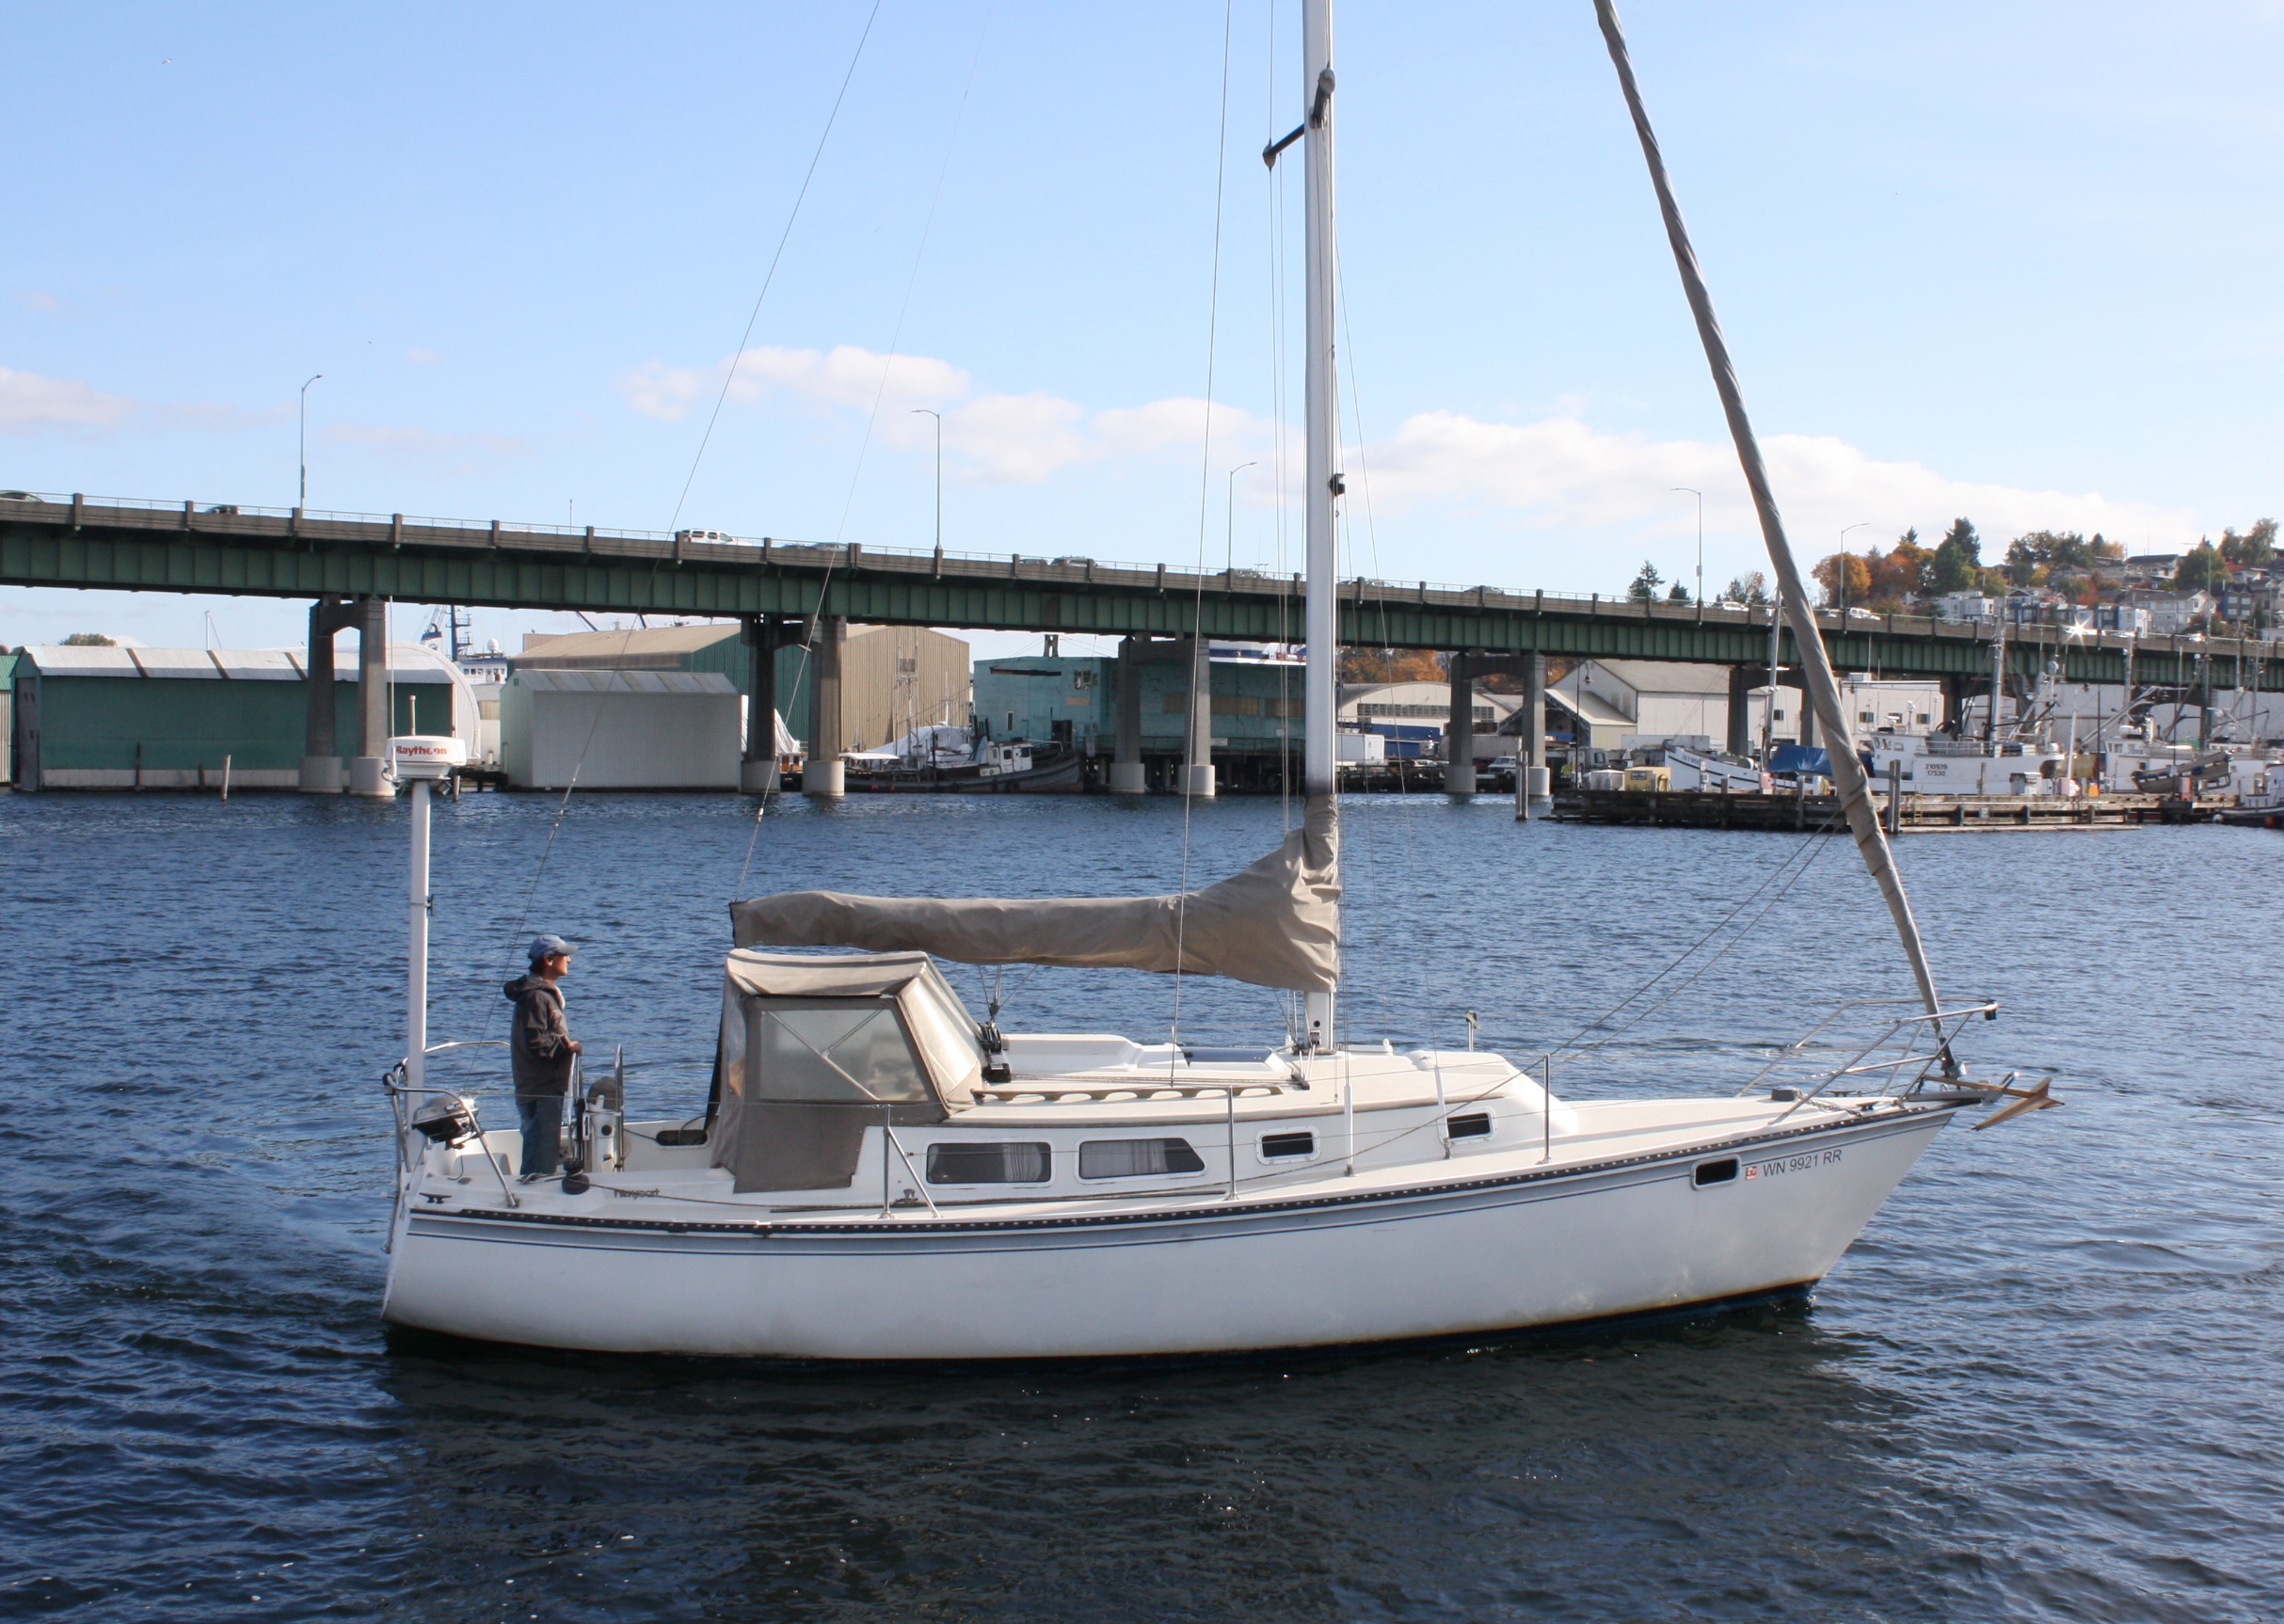 SOLD !! — Newport 30 MK-III, Clean and Ready to Go! – $23,500